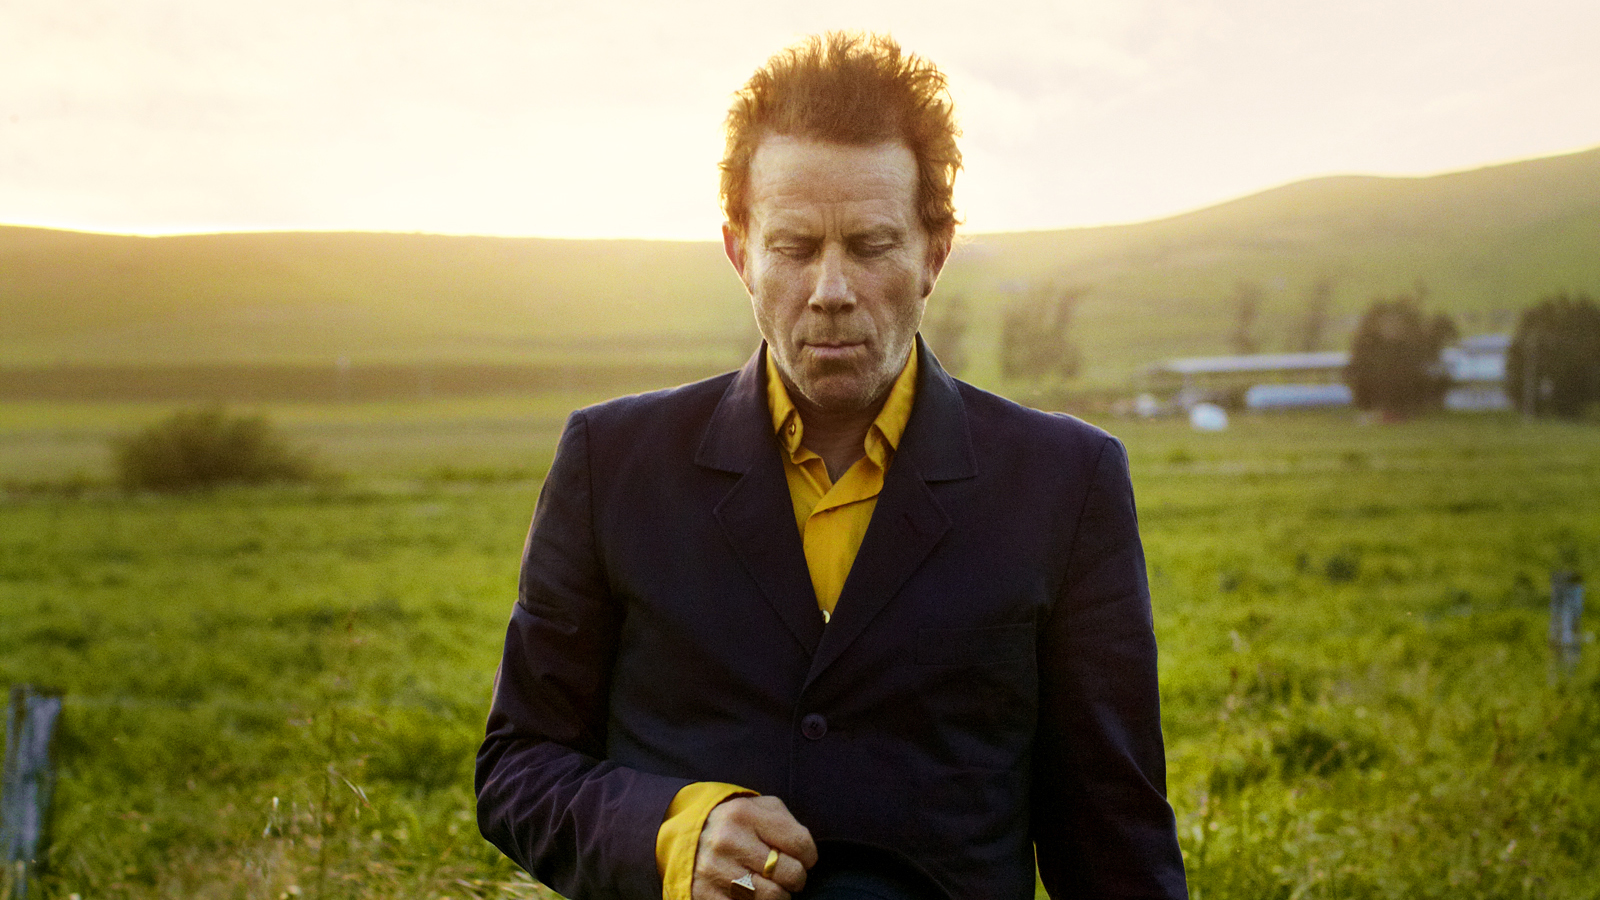 An image of musician Tom Wits walking through a field.